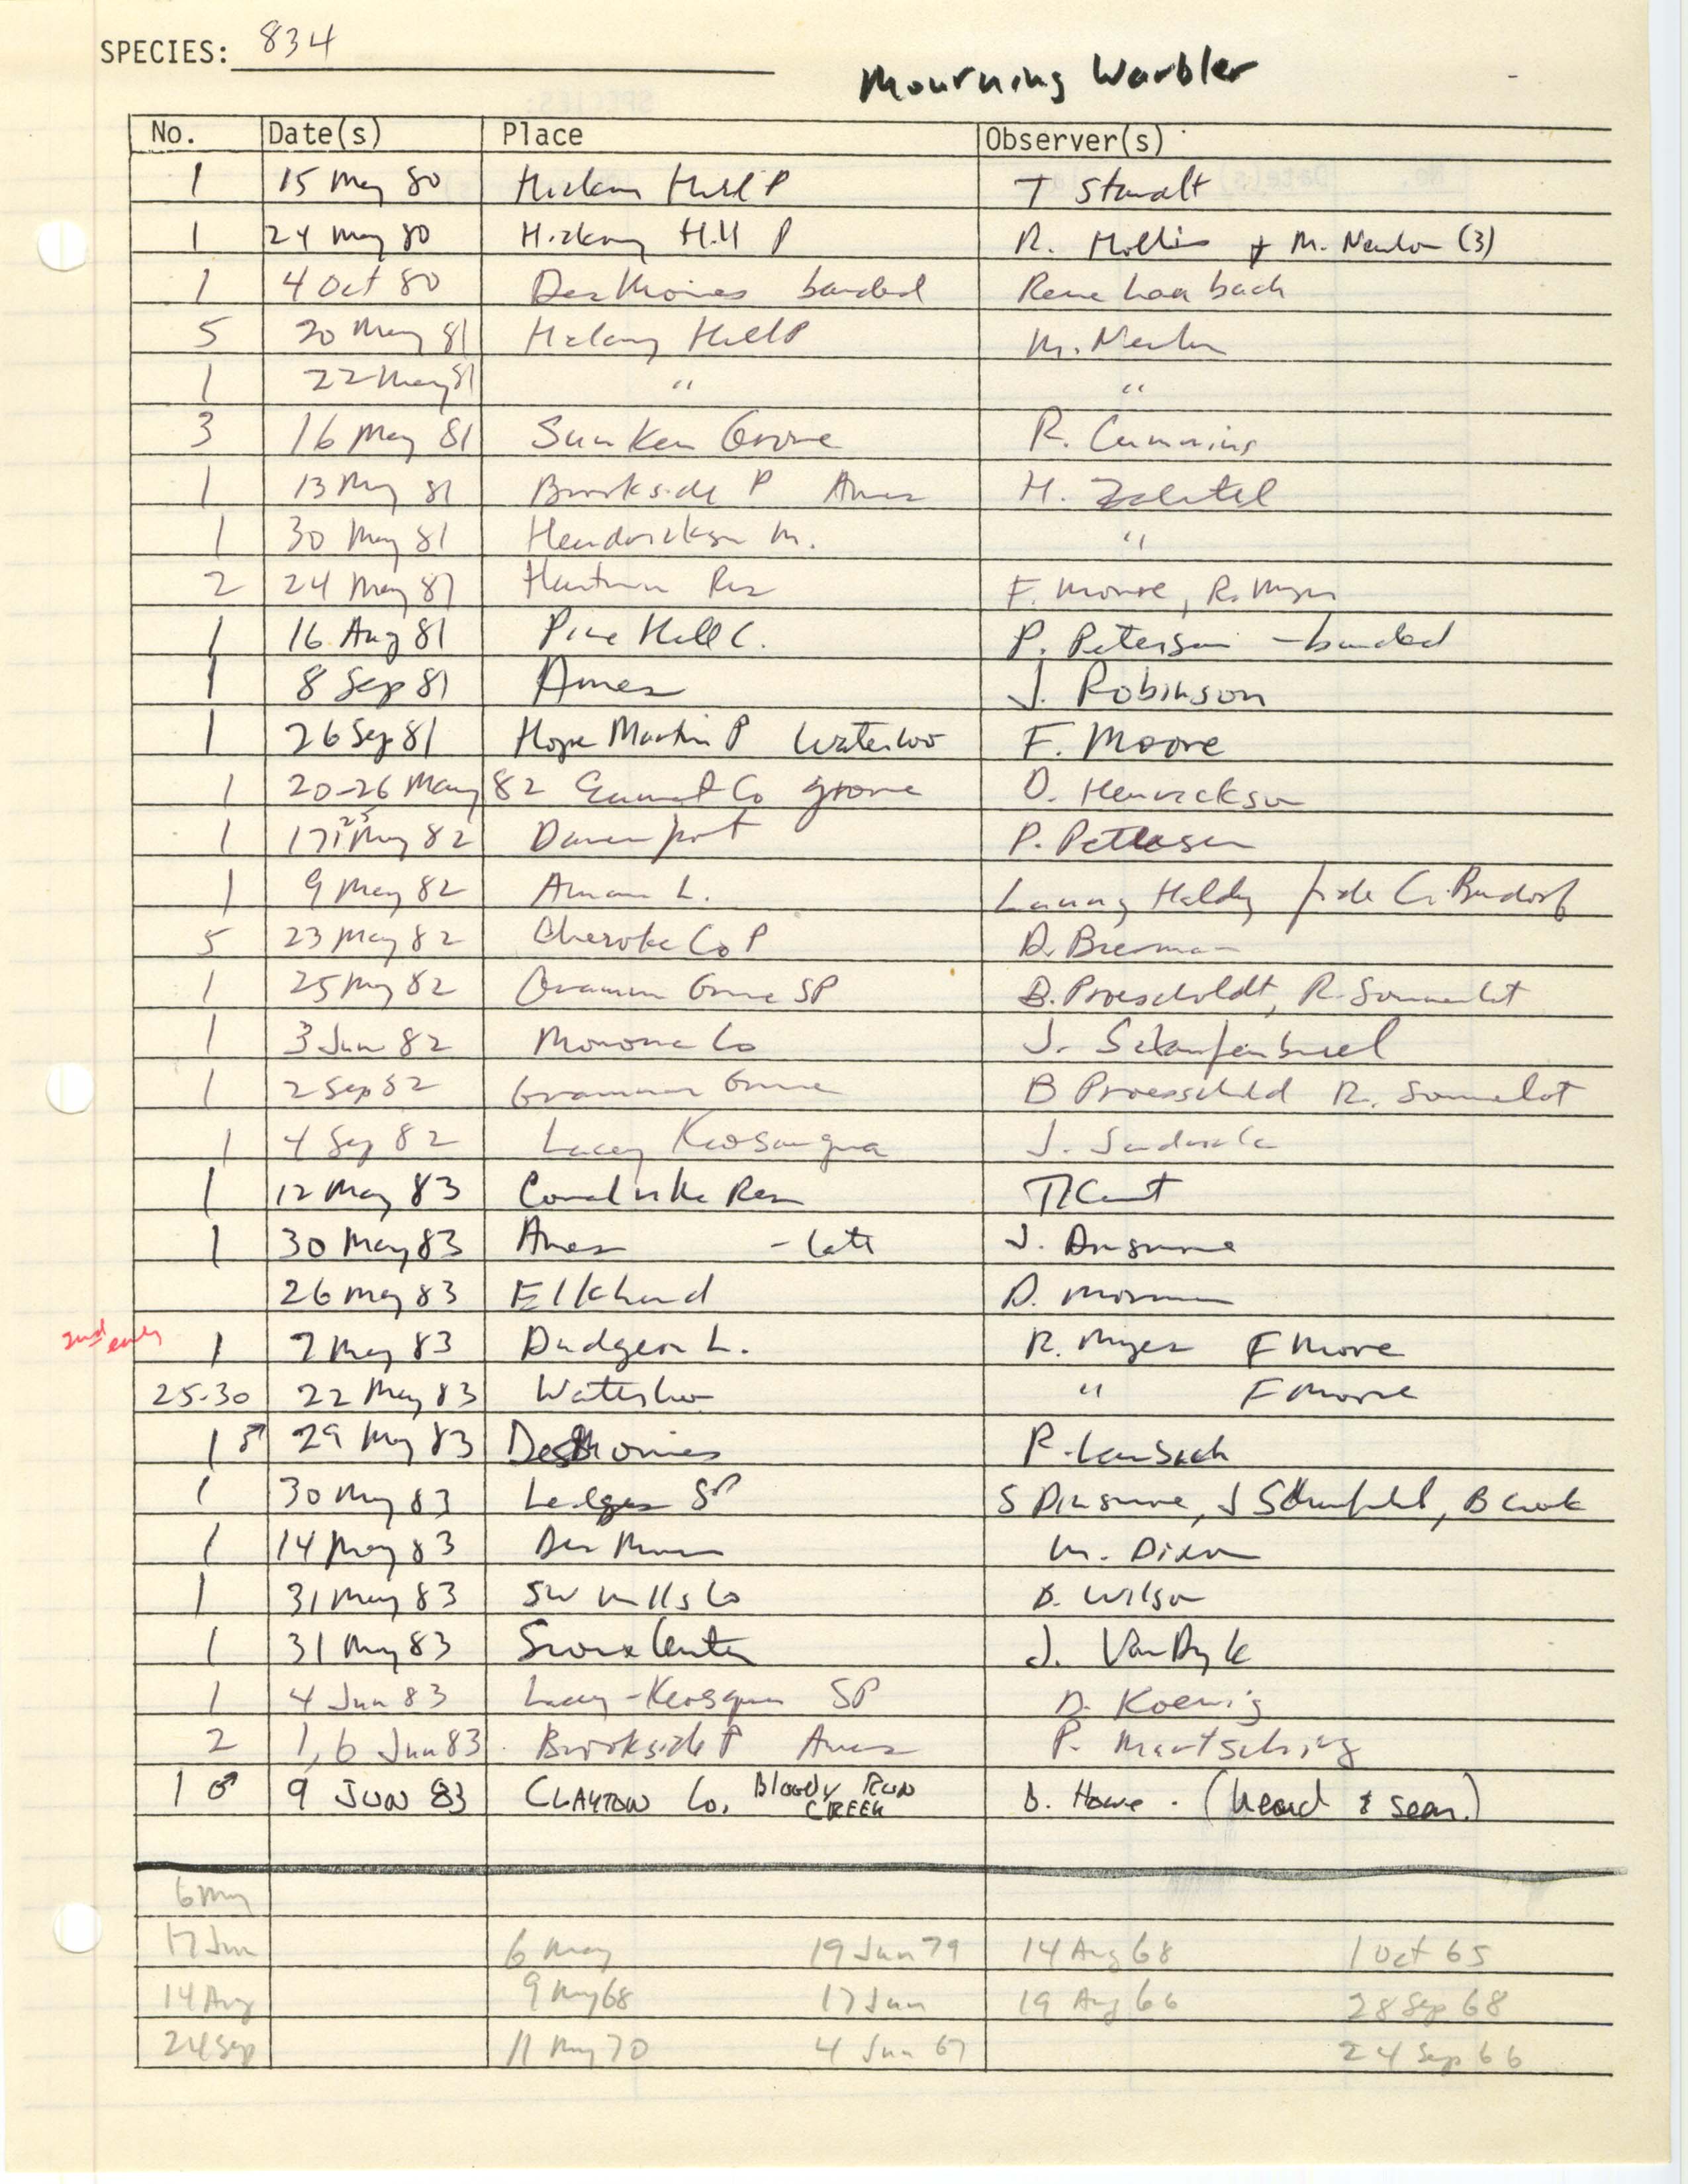 Iowa Ornithologists' Union, field report compiled data, Mourning Warbler, 1980-1983